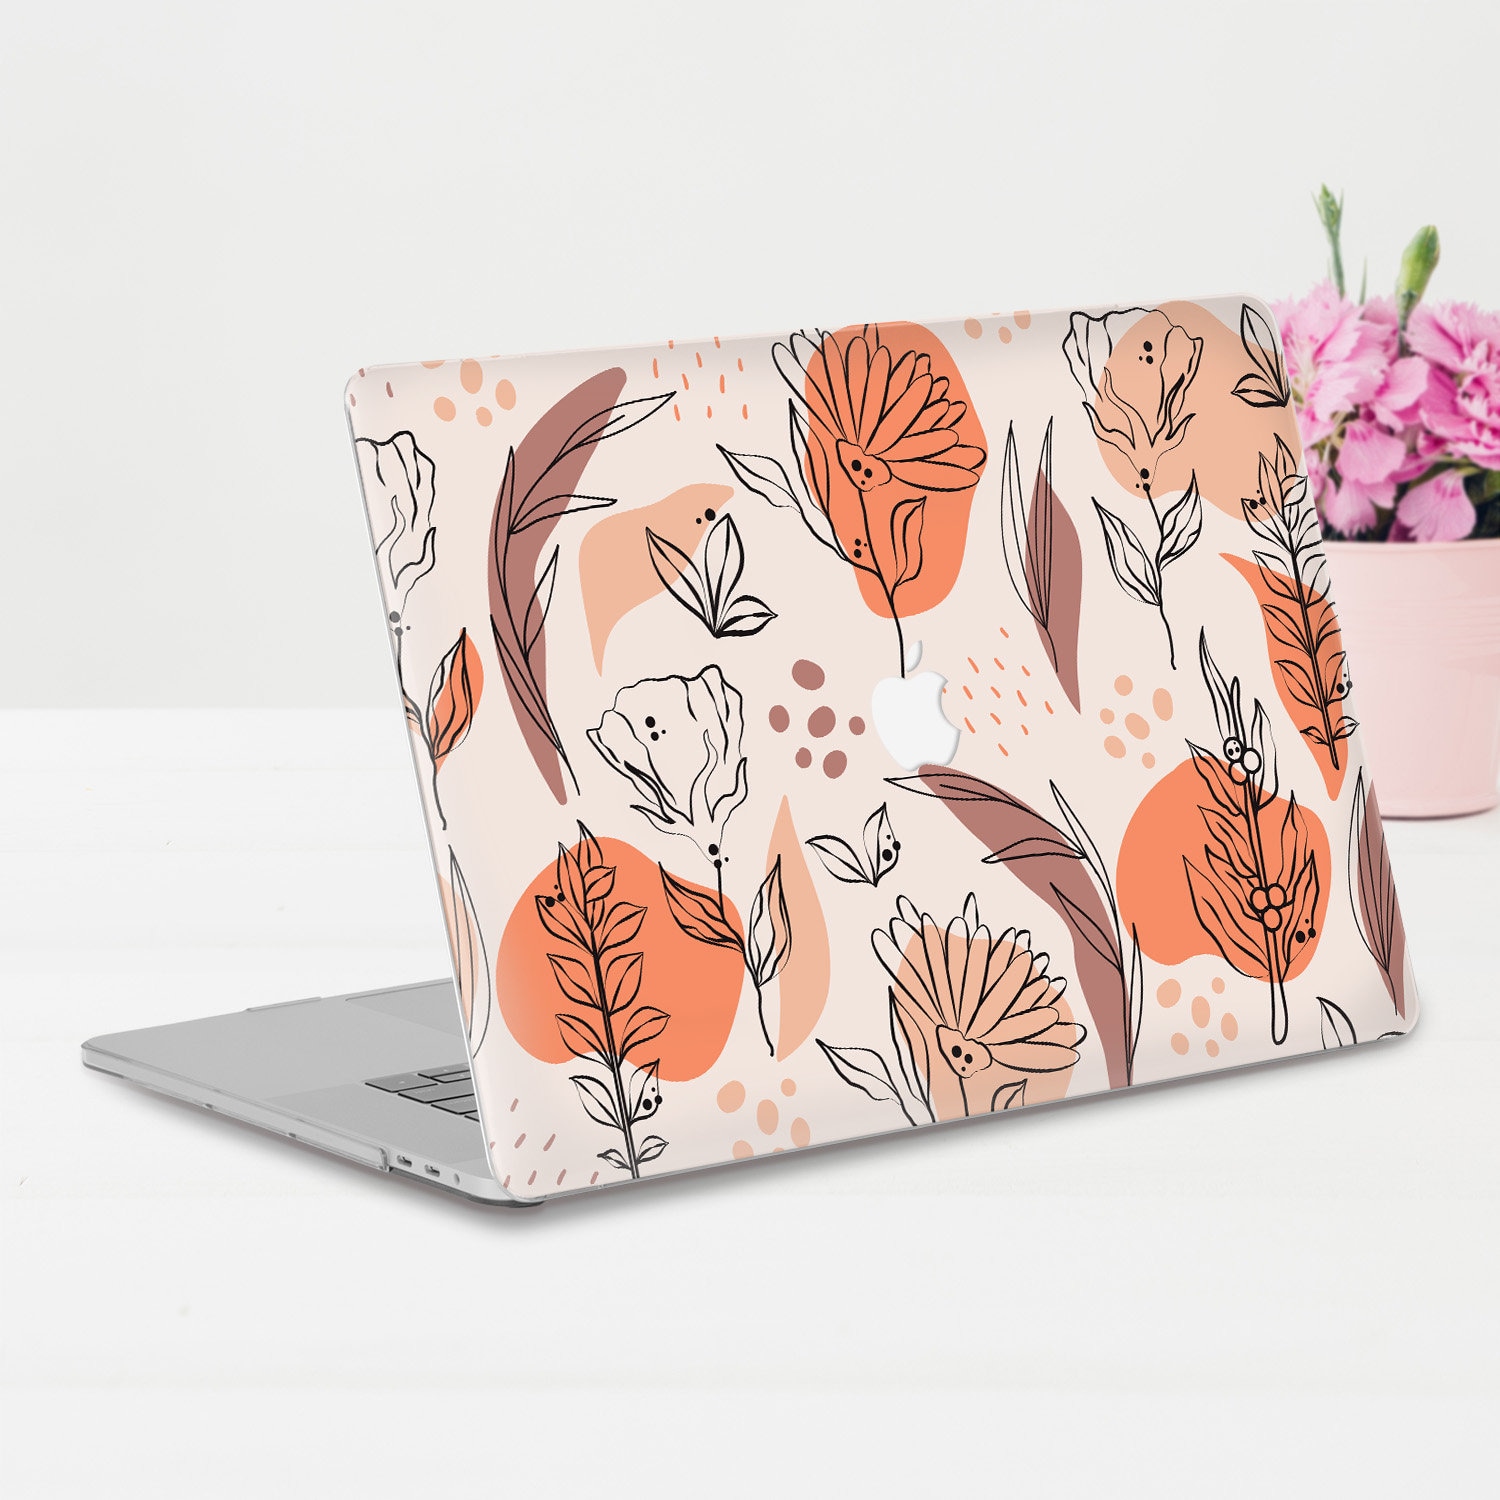 Floral Macbook case Blue Macbook Pro 13 16 Air 13 M1 12 15 inch White Flowers Cute Girly Aesthetic Pretty Lily Elegant case for Women Girls